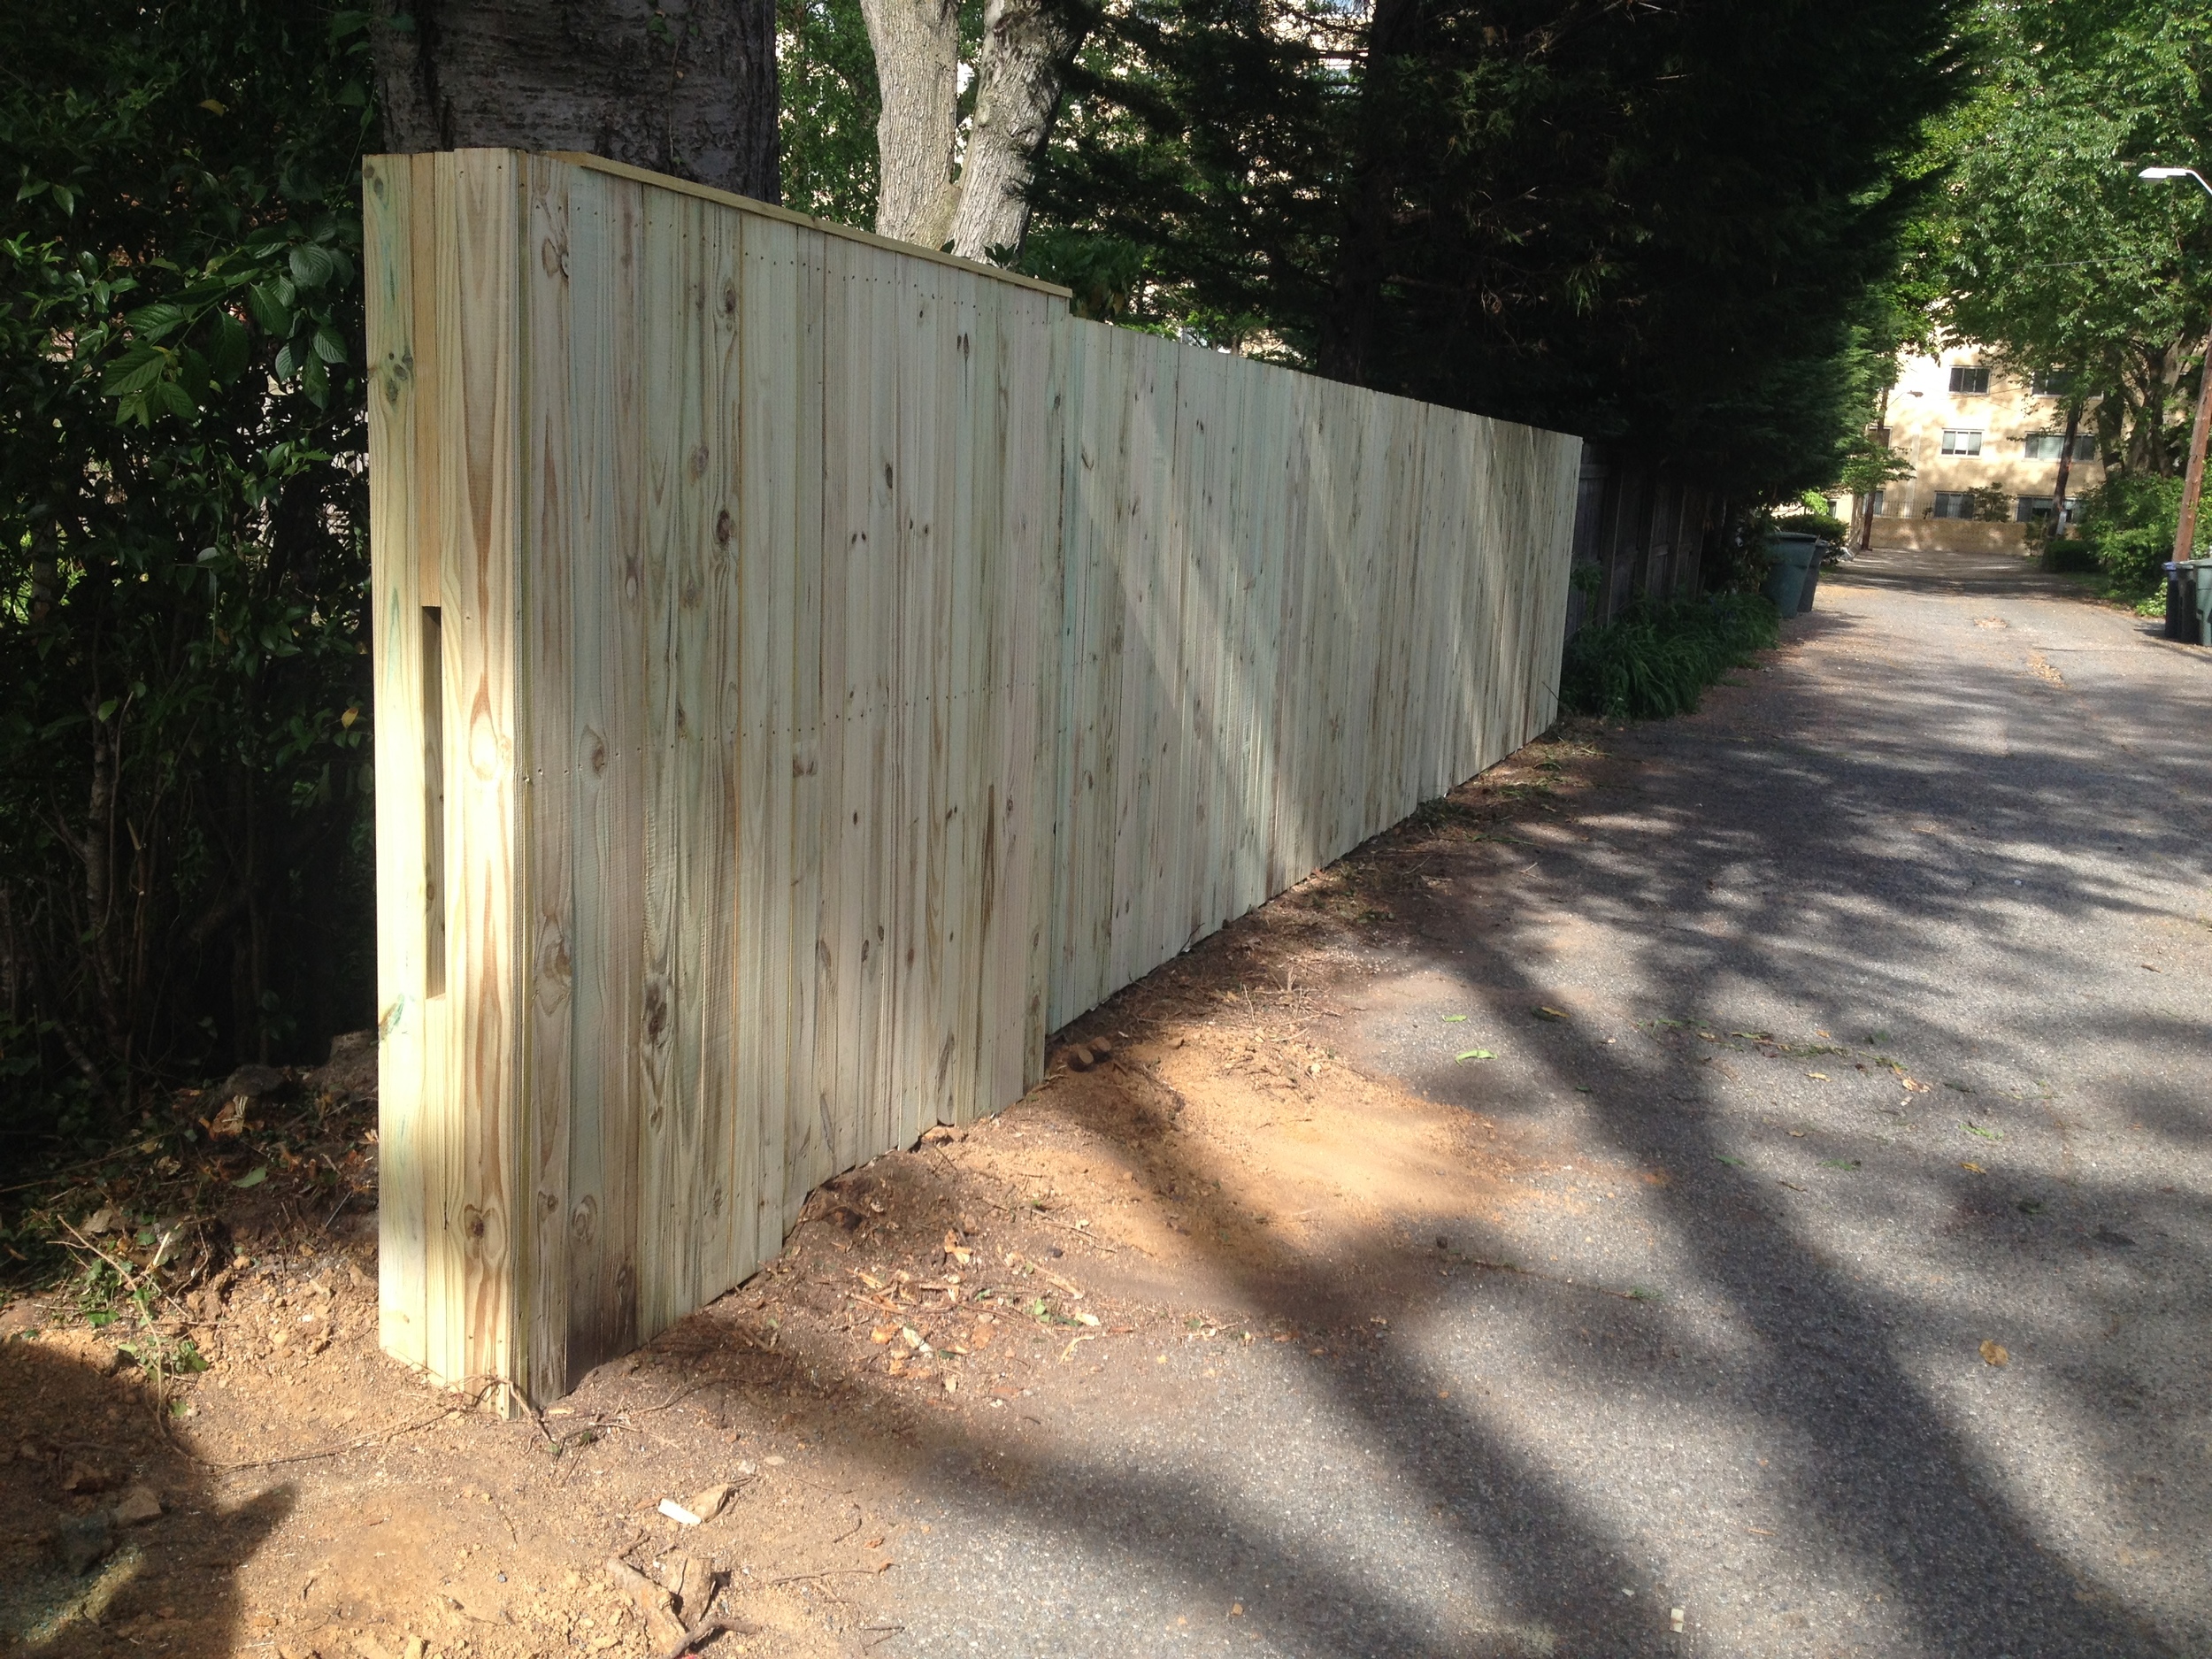  Completed Wooden Fence 